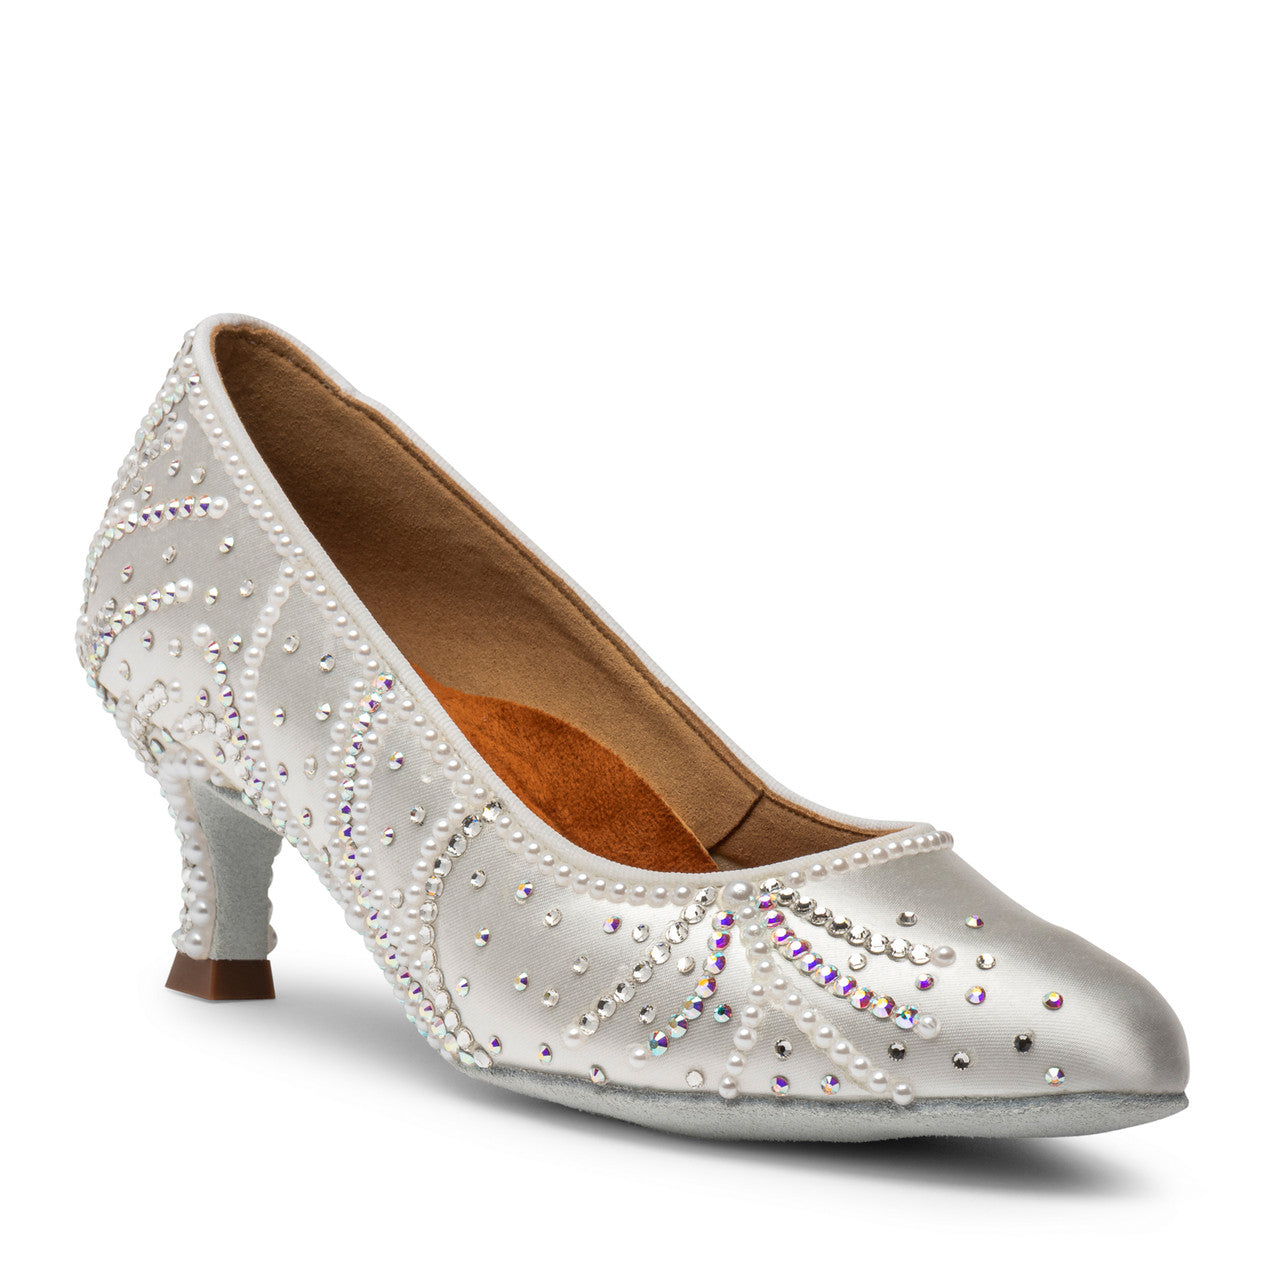 International Dance Shoes IDS White Satin ICS RoundToe by Lauren Ballroom Shoe Covered in Preciosa Crystals